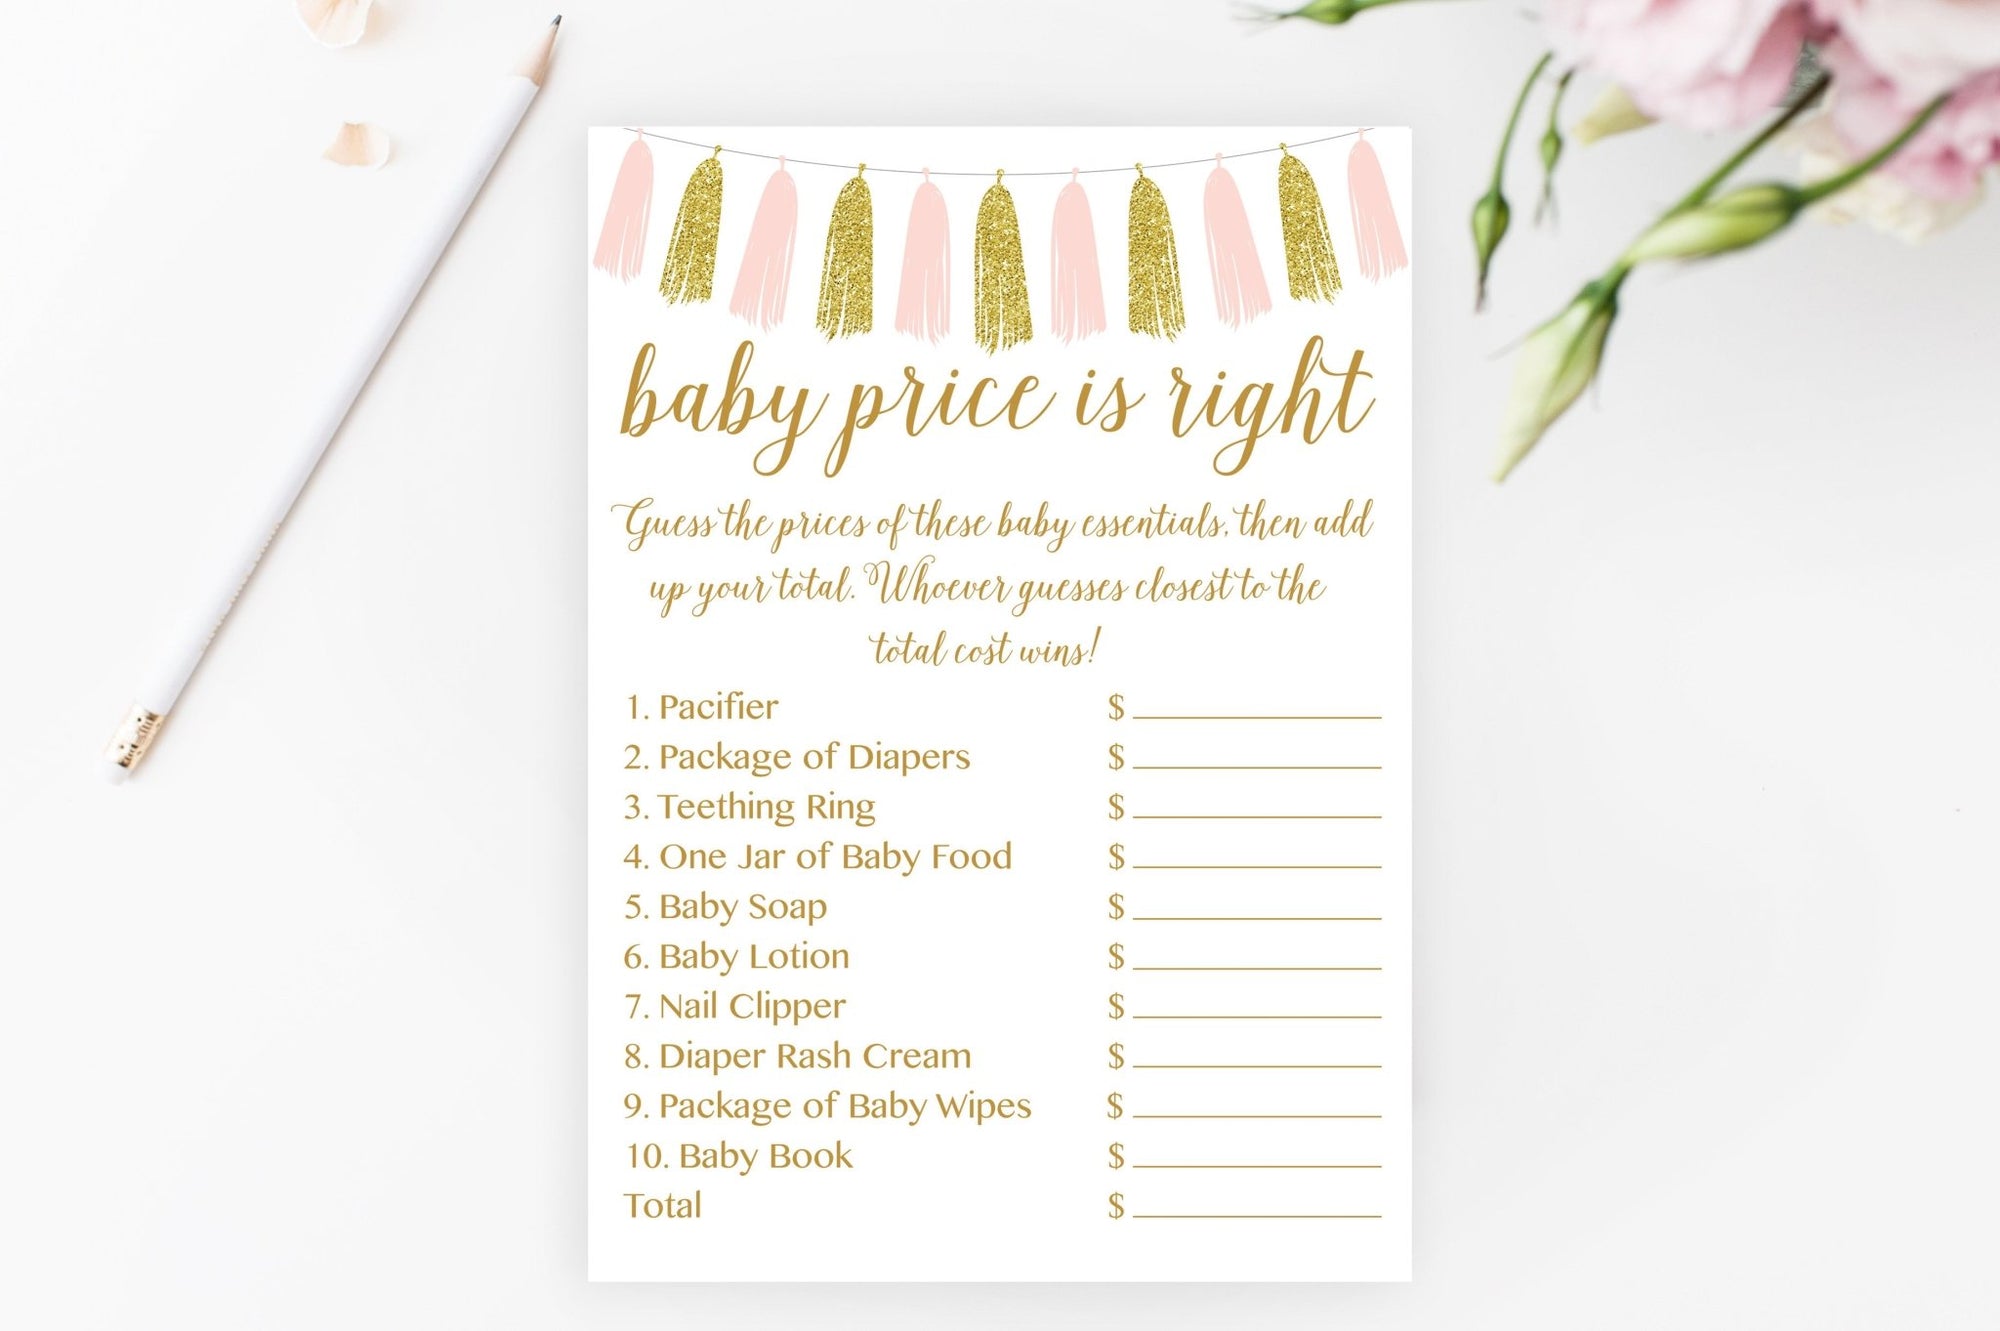 Baby Price Is Right - Pink & Gold Tassel Printable - Pretty Collected